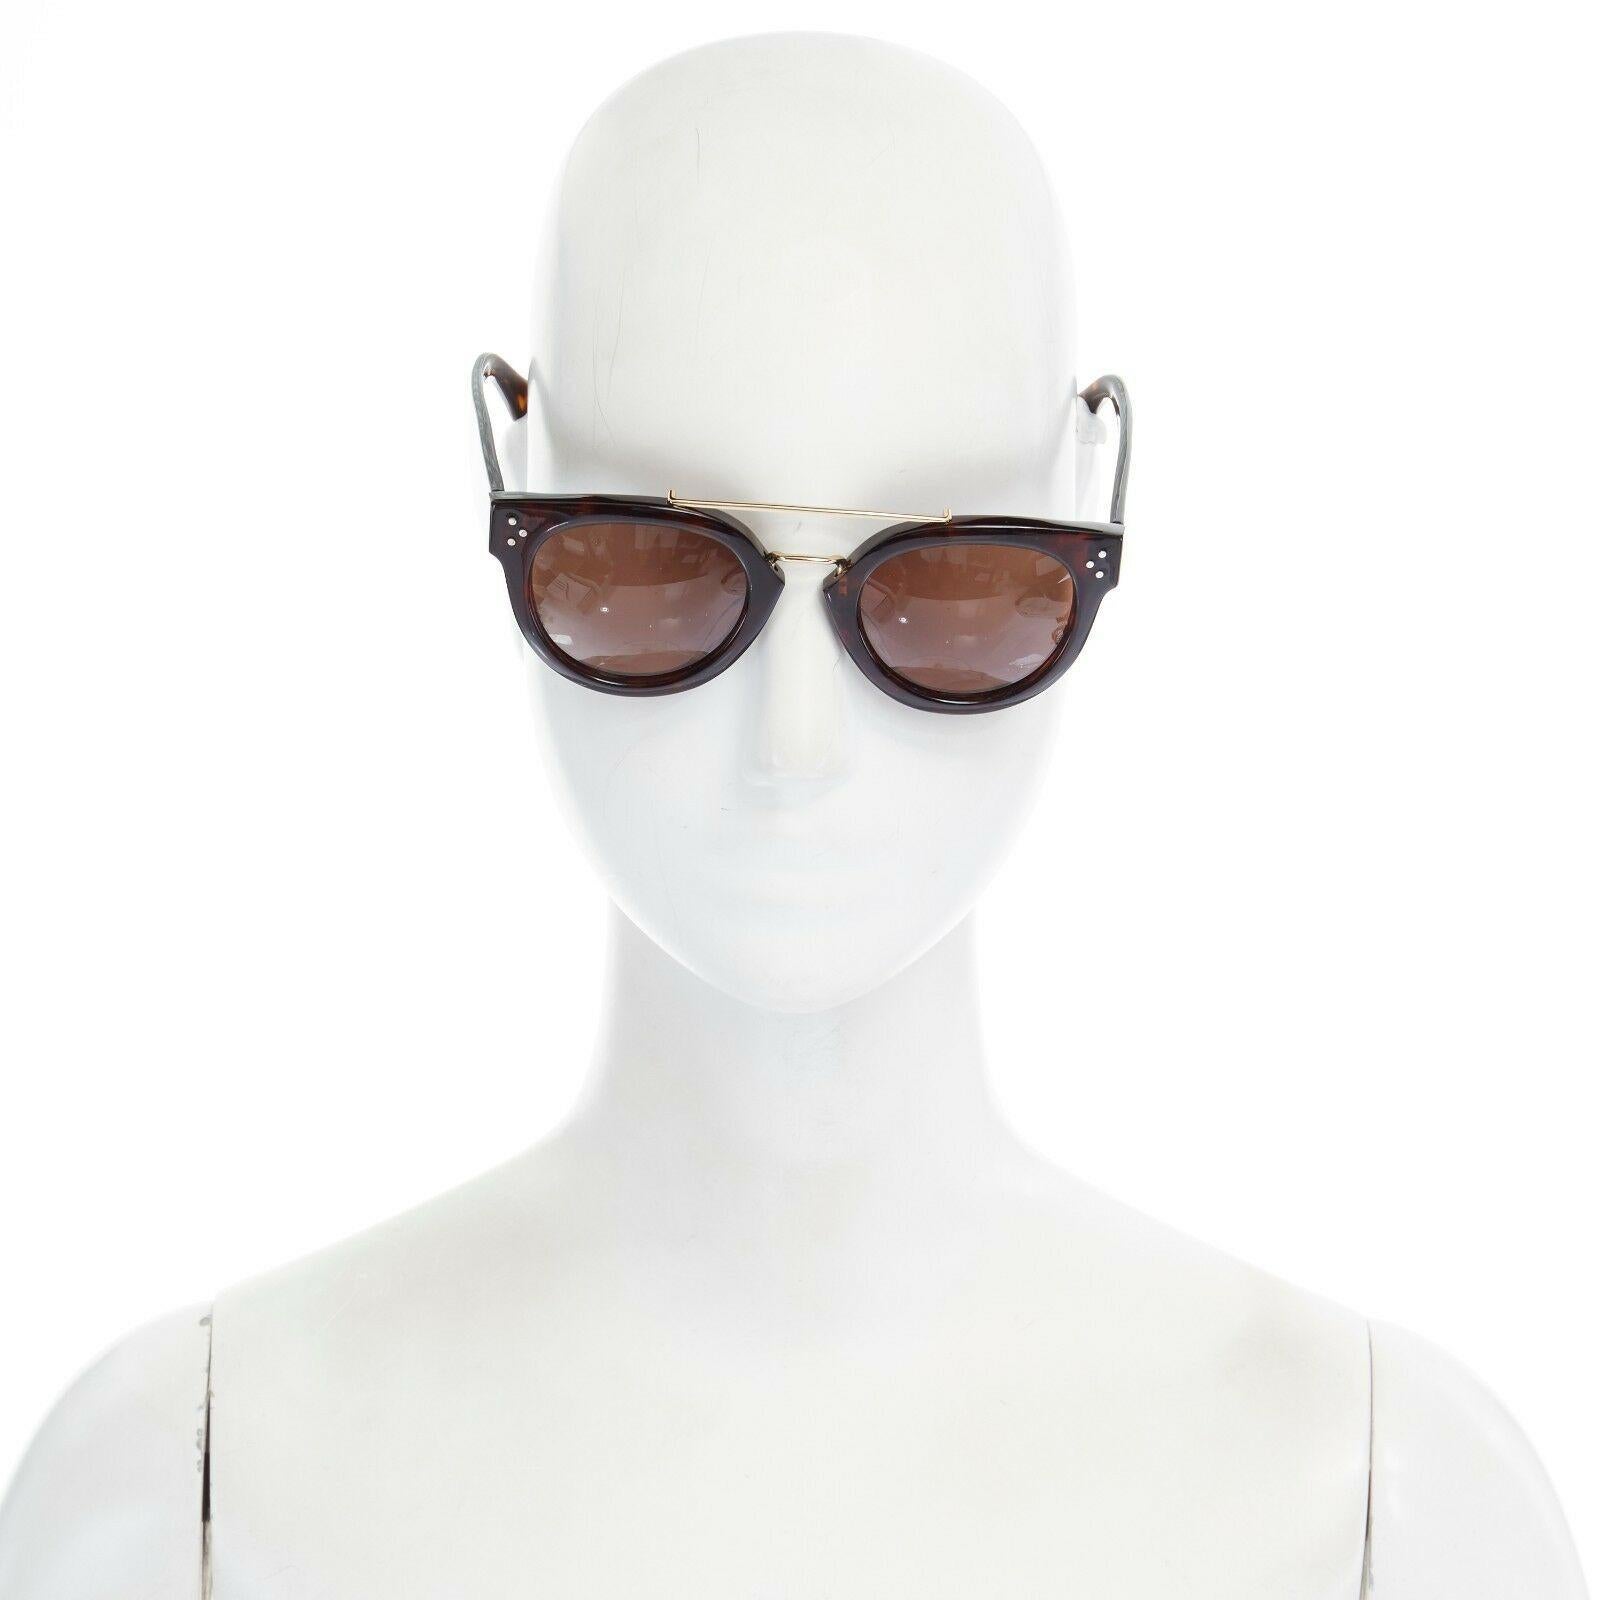 CELINE PHOEBE PHILO brown acetate thick frame browbar brown lens sunglasses

CELINE BY PHOEBE PHILO
Brown tortoiseshell acetate. Gold tone accented at brow bar. Signature silver stud detail at temple.  Rounded square shape. Molded nose pads. Thick